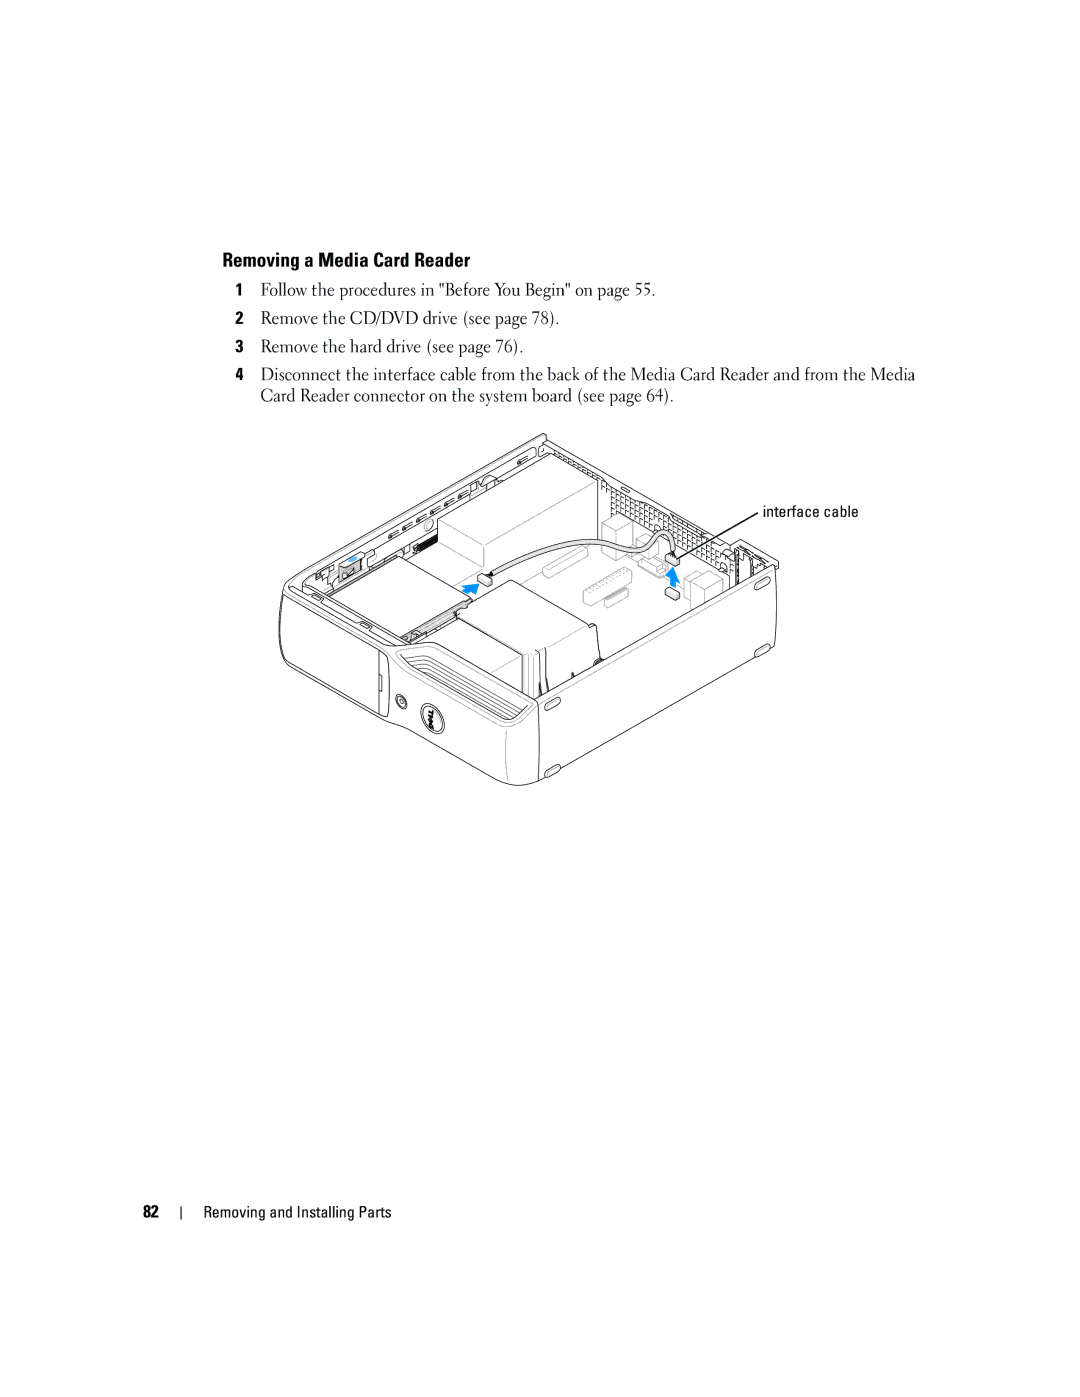 Dell 5150C owner manual Removing a Media Card Reader, Interface cable Removing and Installing Parts 